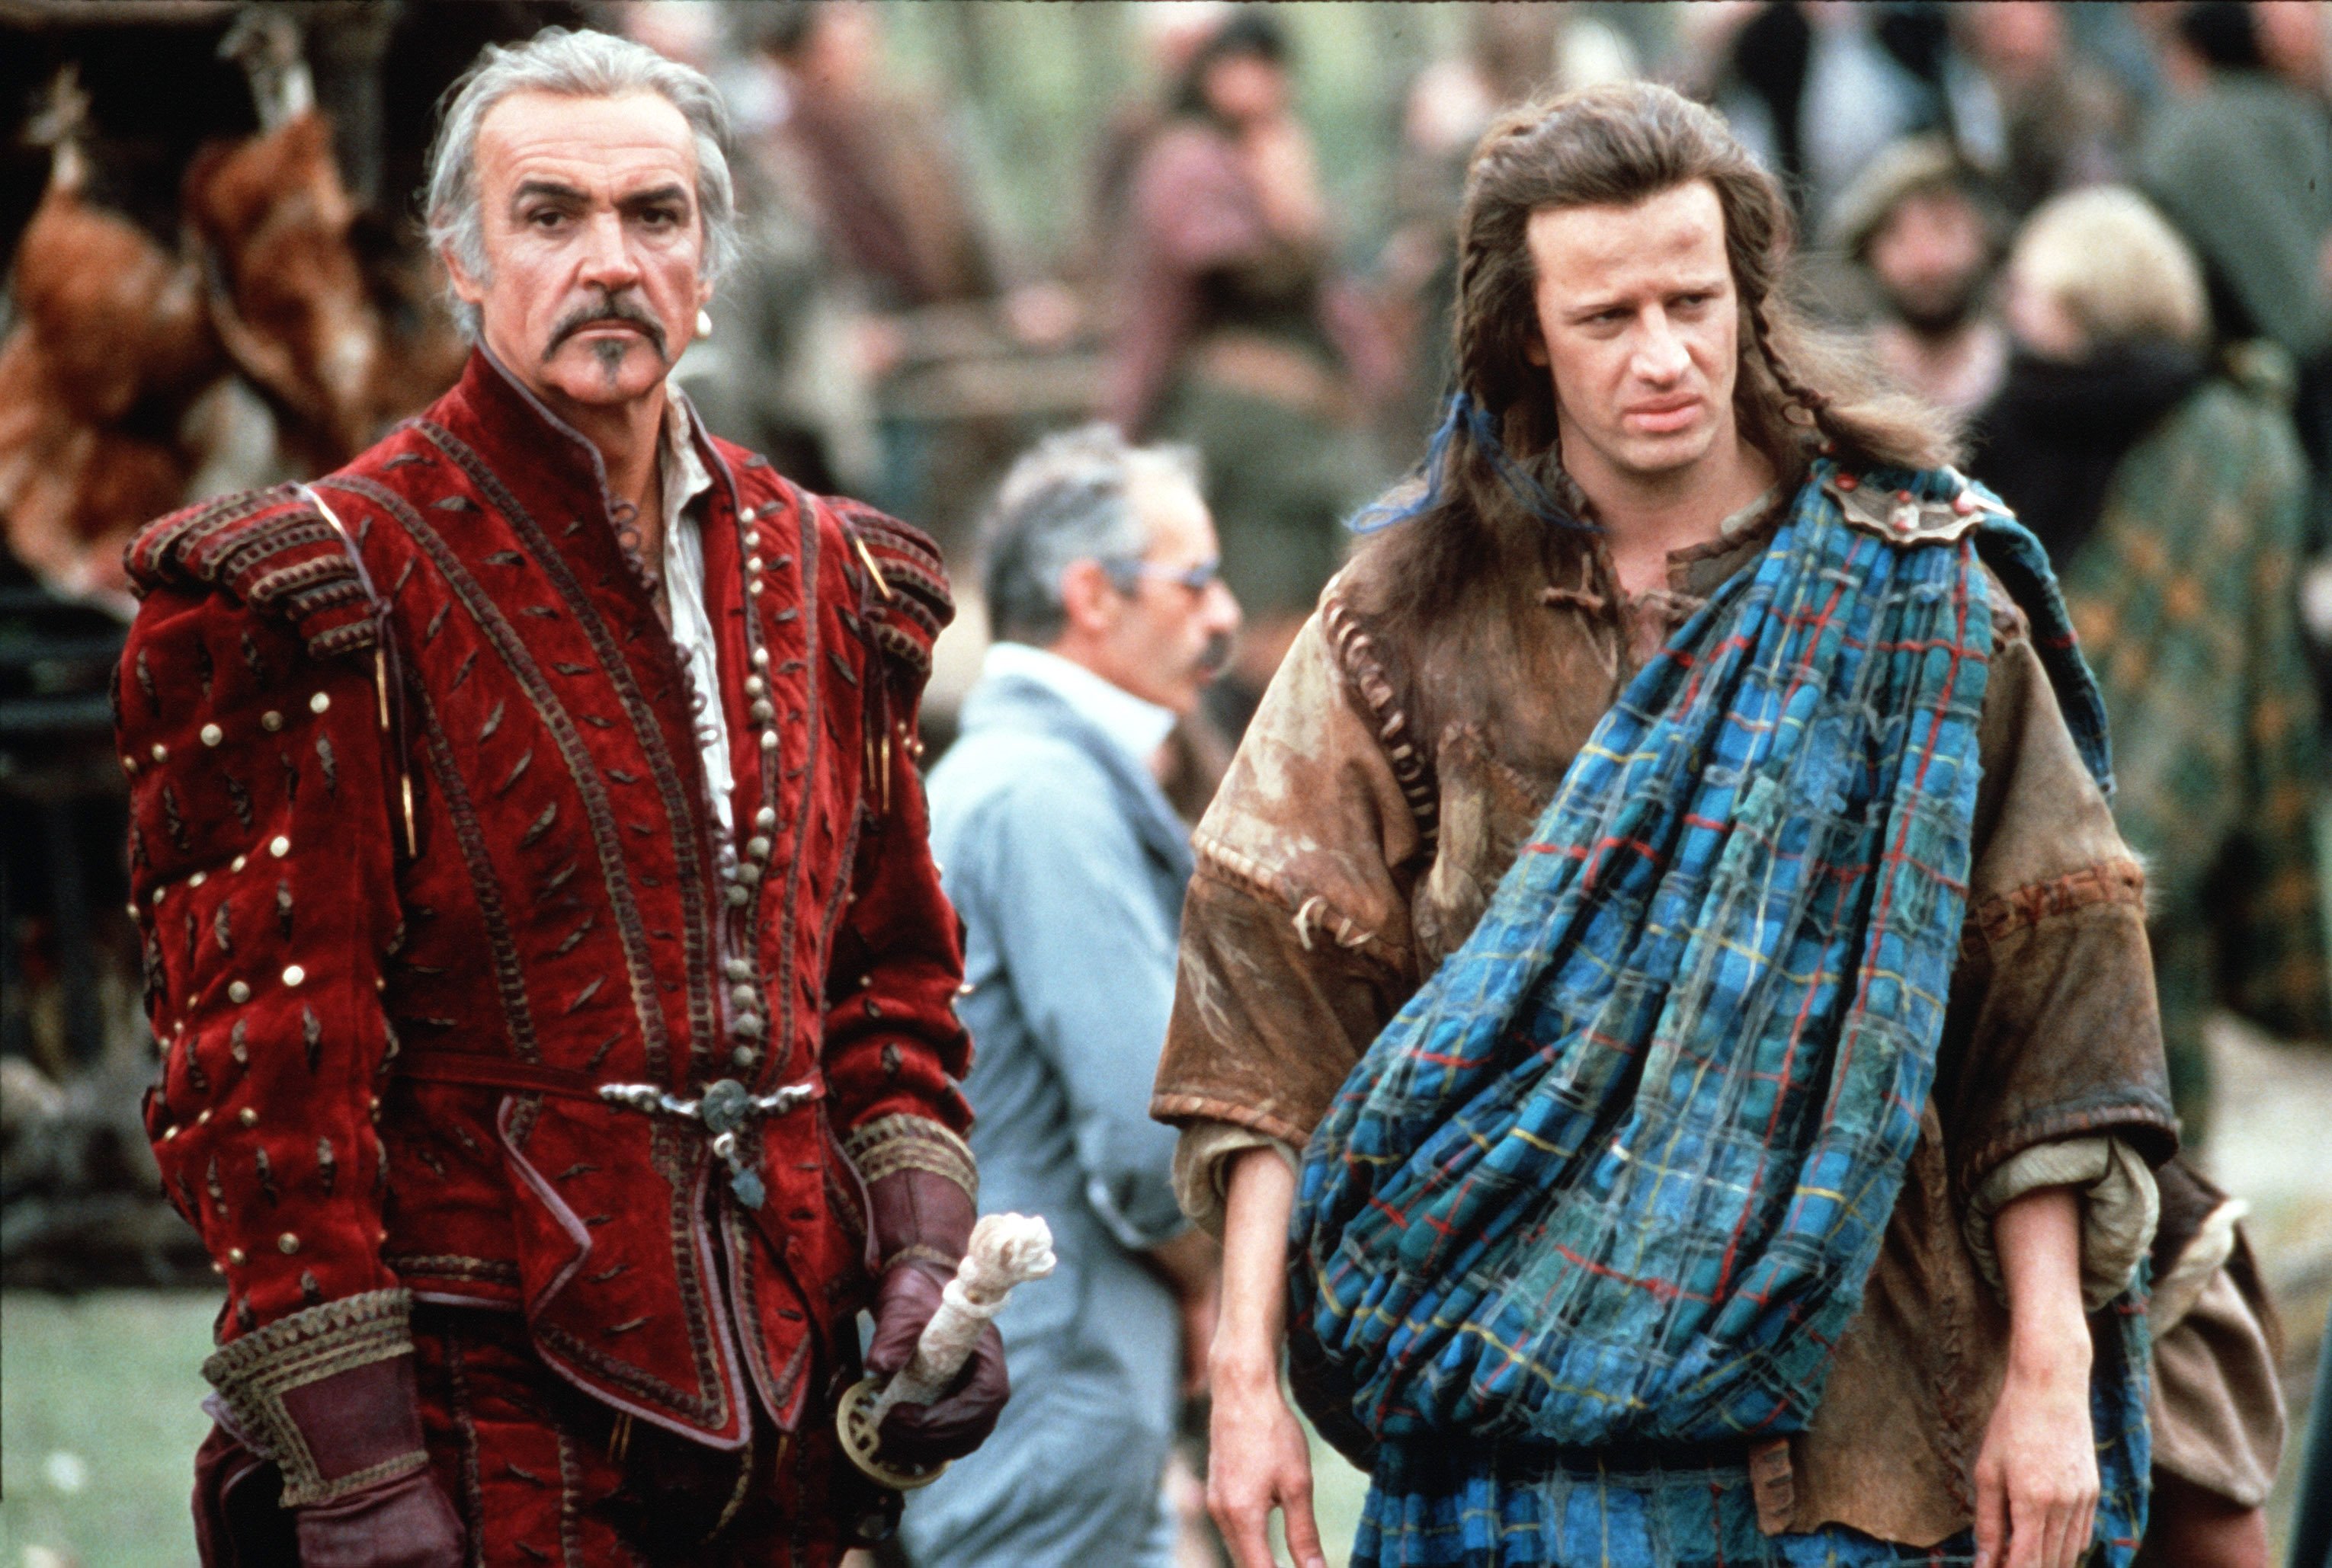 Director Russell Mulcahy opens up about Sean Connery's booze-fuelled antics  on the set of Highlander